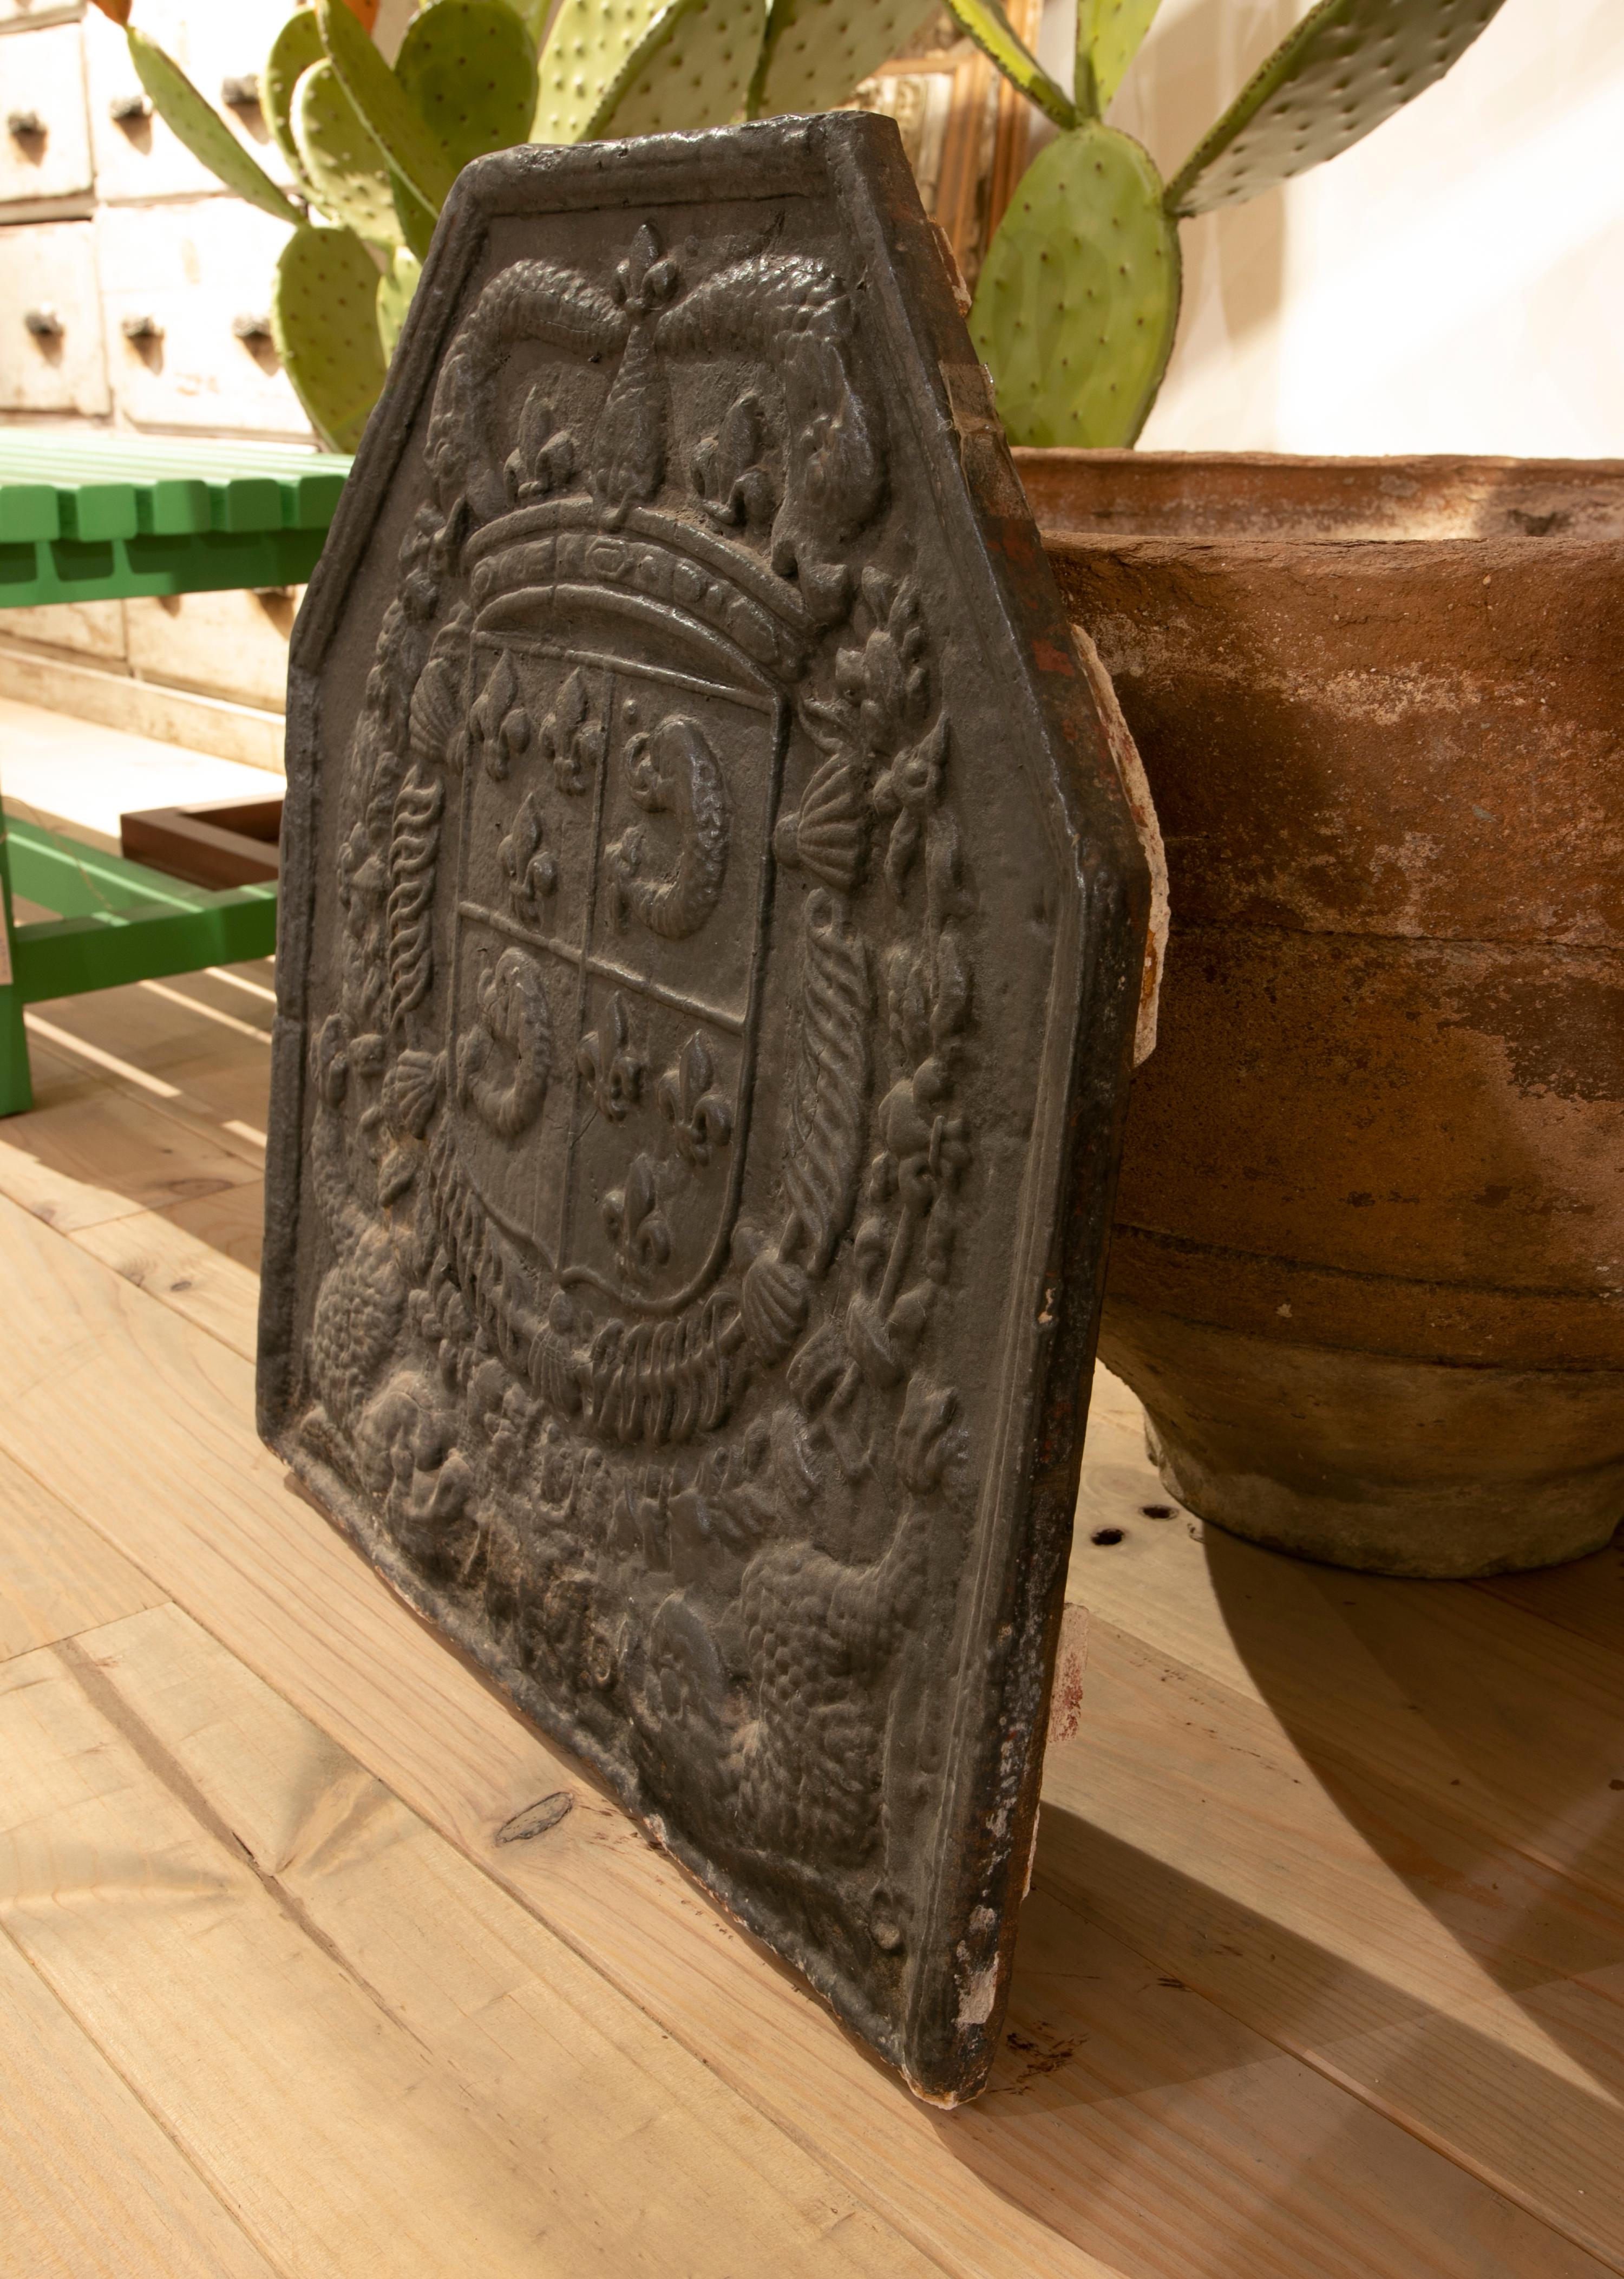 Mid-19th Century Spanish Cast Iron Fireback w/ Relief Heraldry Coat of Arms For Sale 2